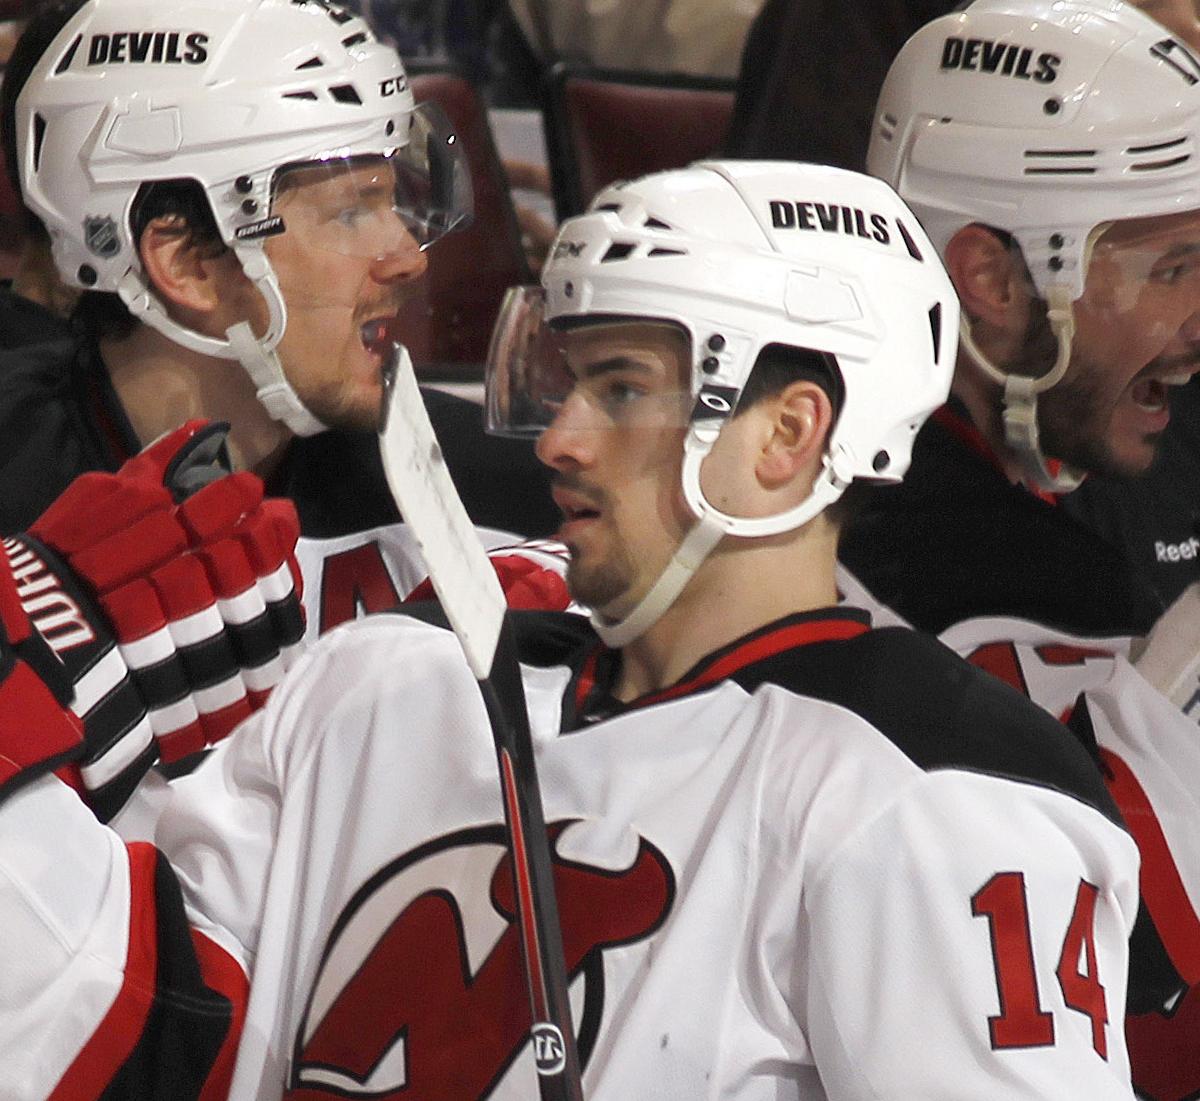 Adam Henrique saves the Devils again, eliminating Panthers in double OT